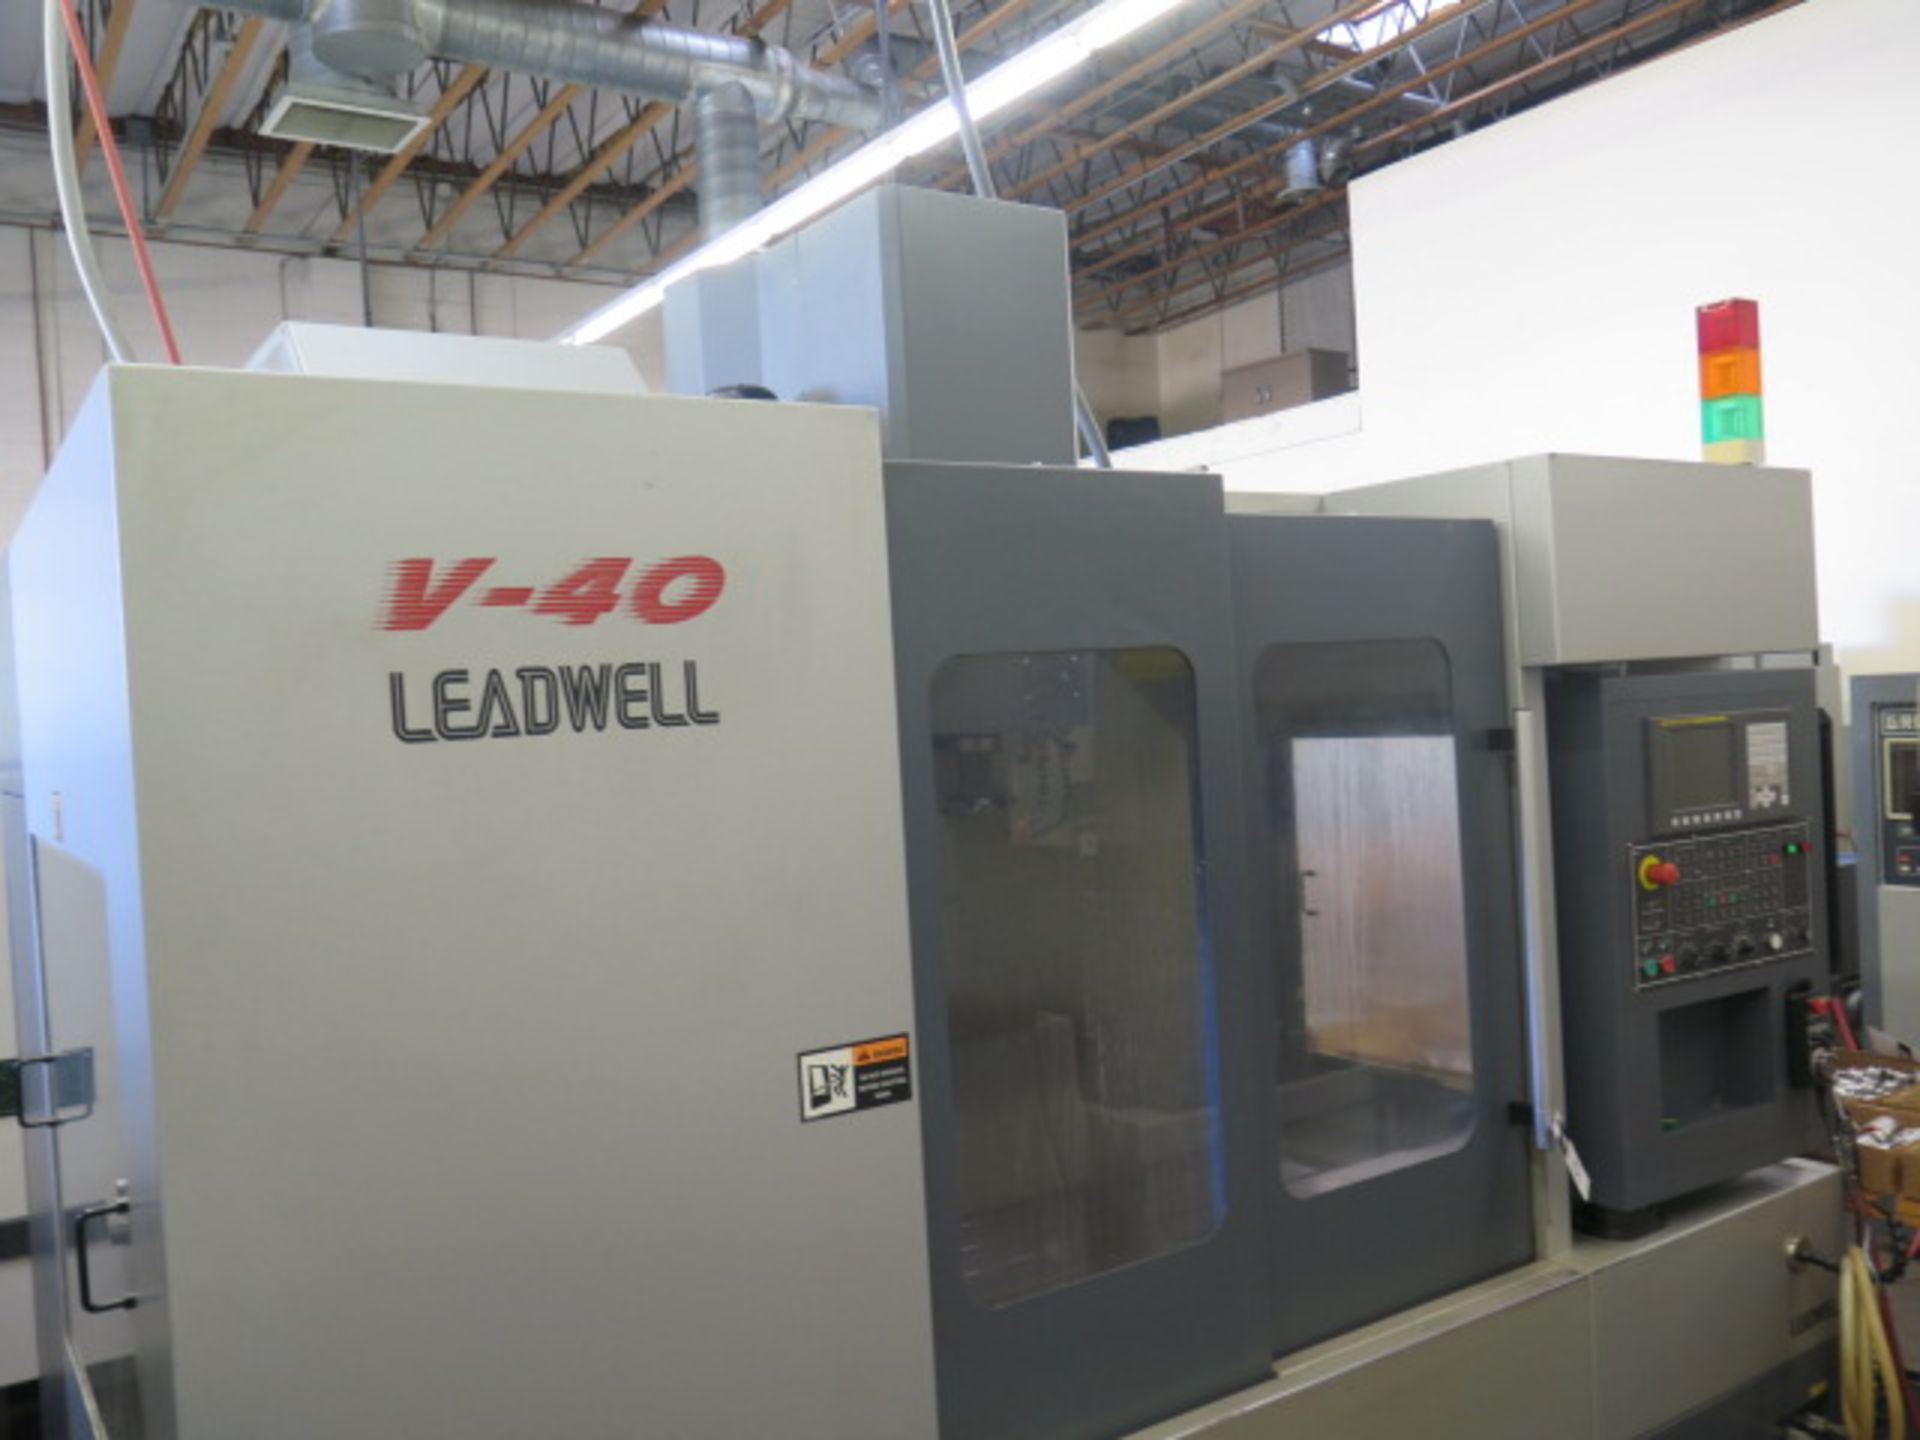 2011 Leadwell V-40 CNC VMC w/ Fanuc Series 0i-MD Controls, Hand Wheel, 24 ATC, SOLD AS IS - Image 2 of 13